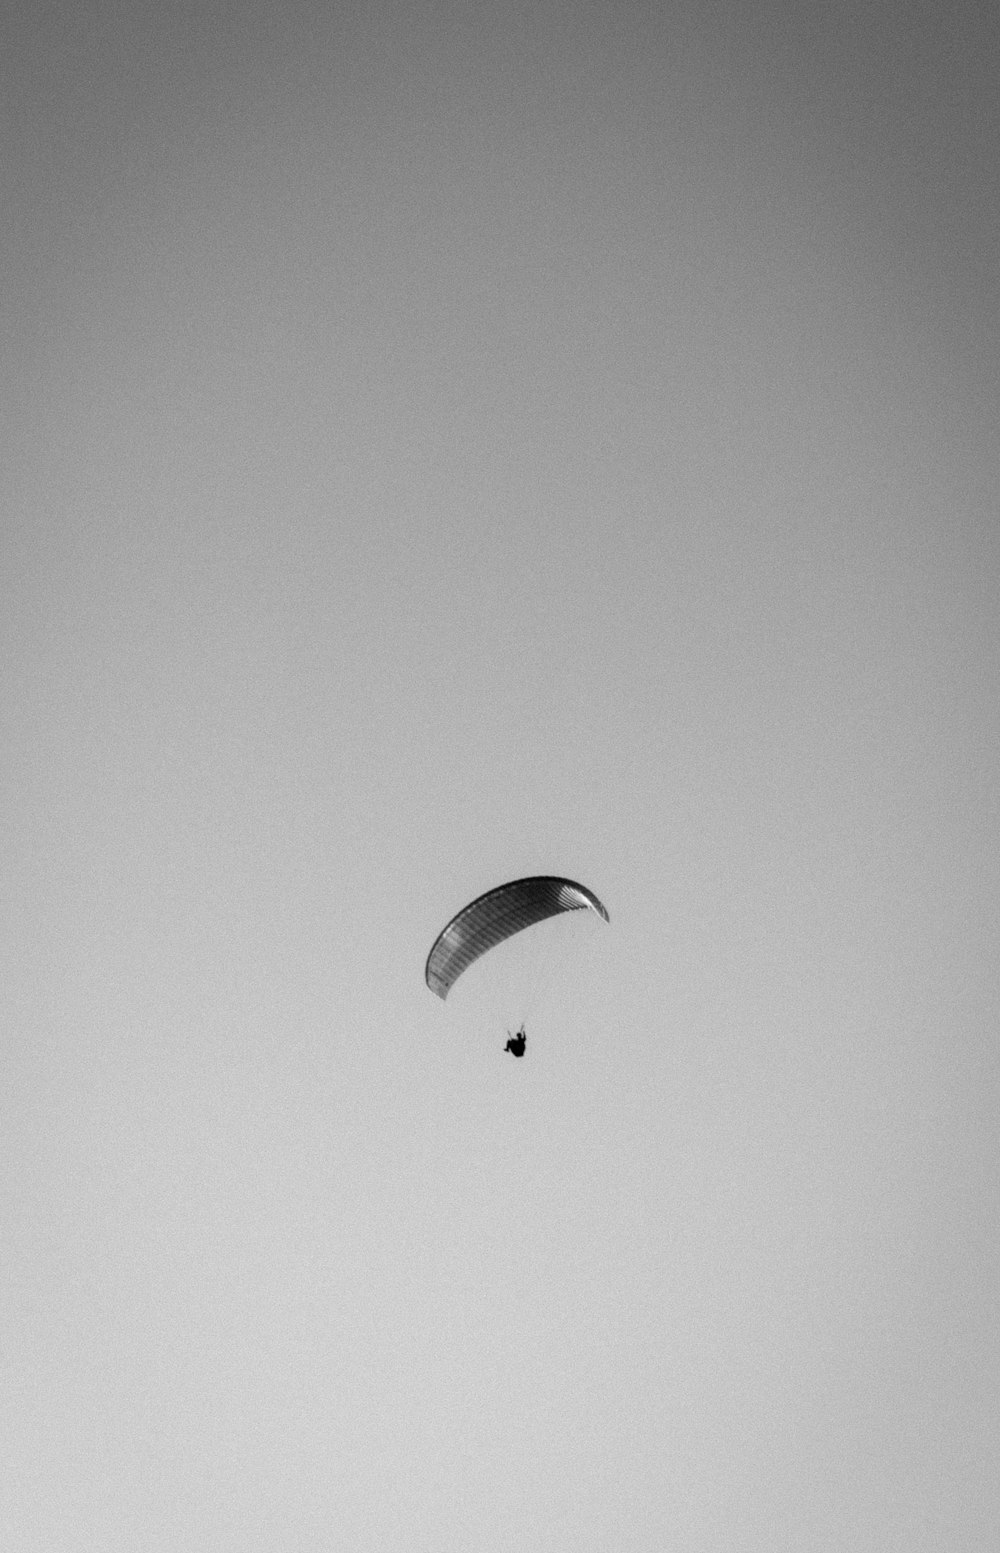 a paraglider is flying high in the sky